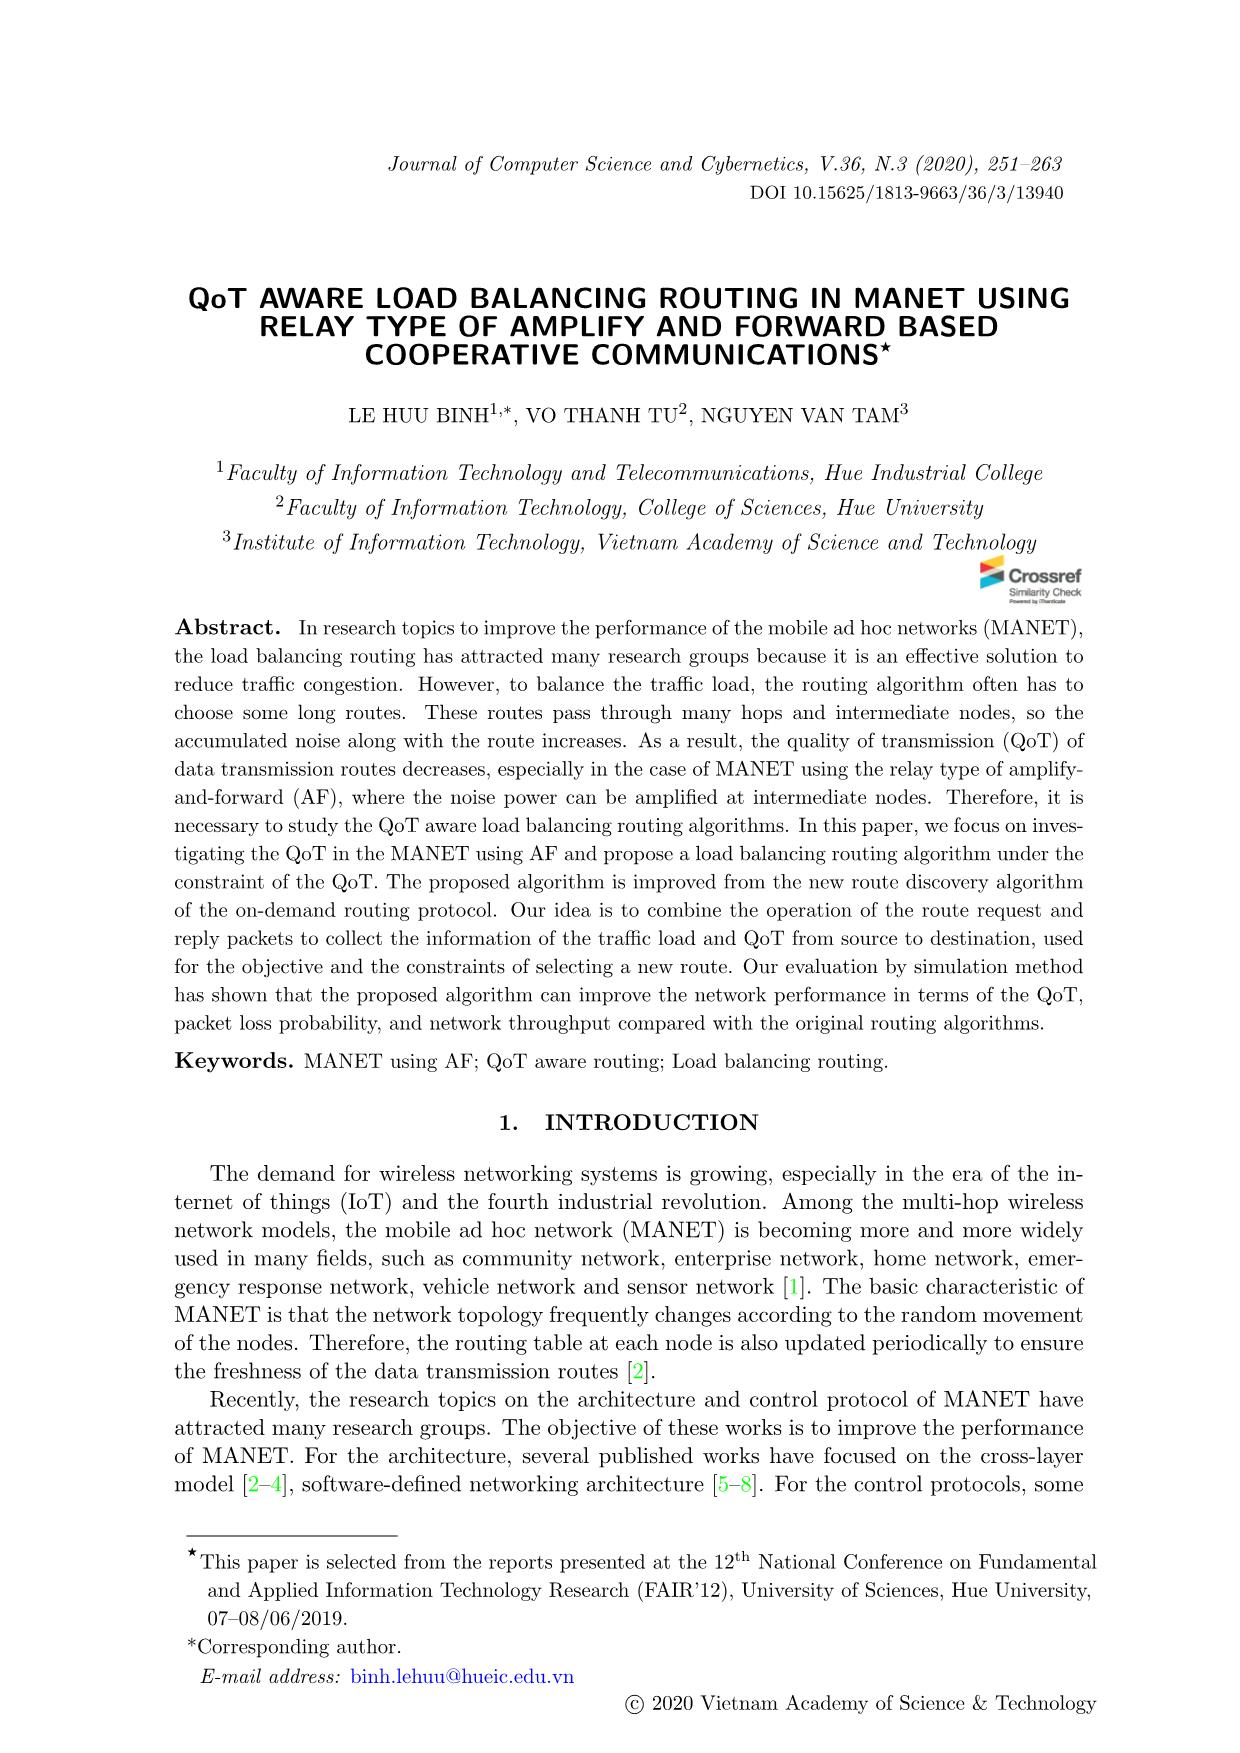 QoT aware load balancing routing in manet using relay type of amplify and forward based cooperative communications trang 1